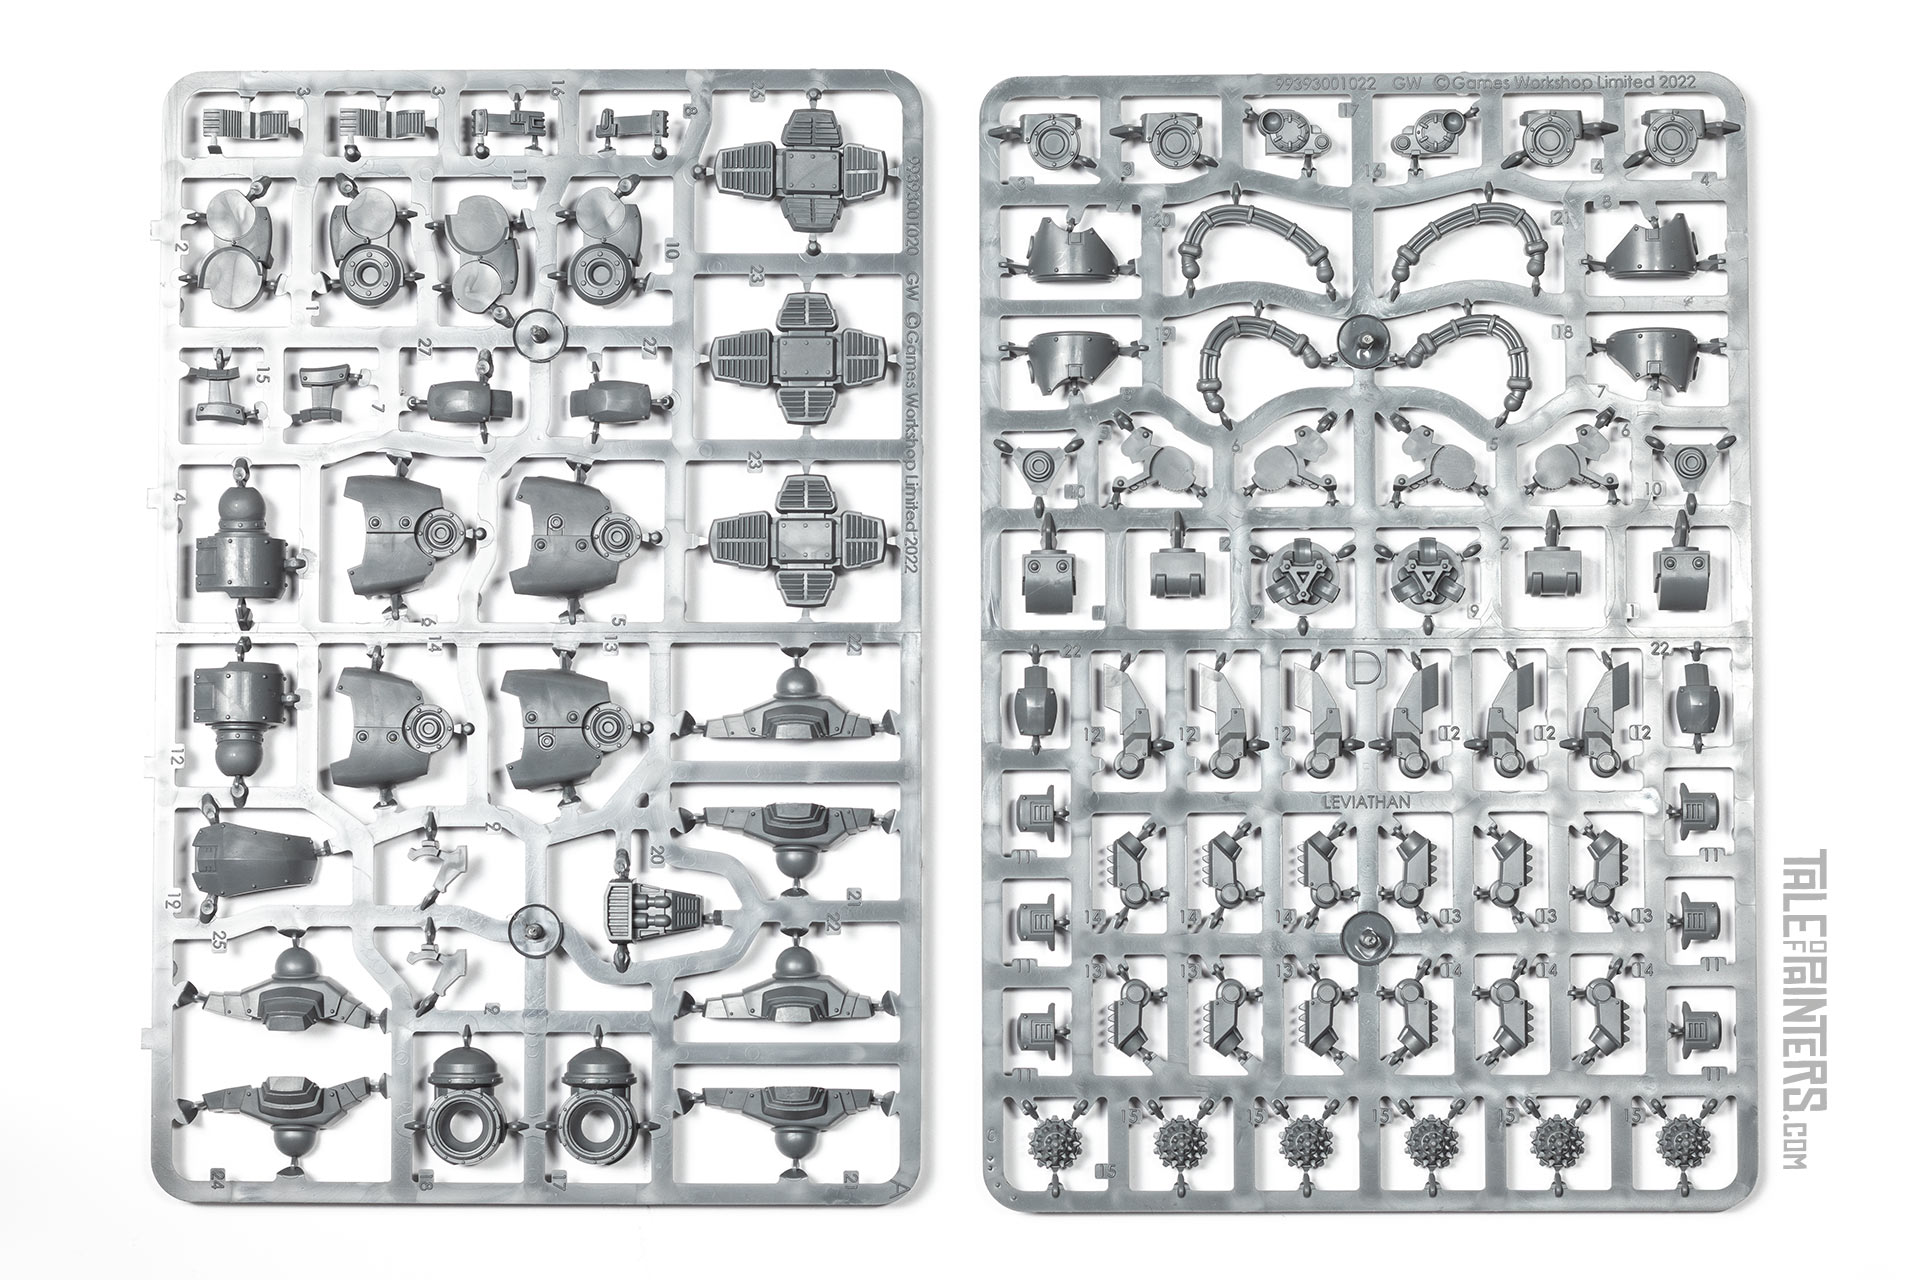 Leviathan Siege Dreadnought with claw and drill weapons sprues